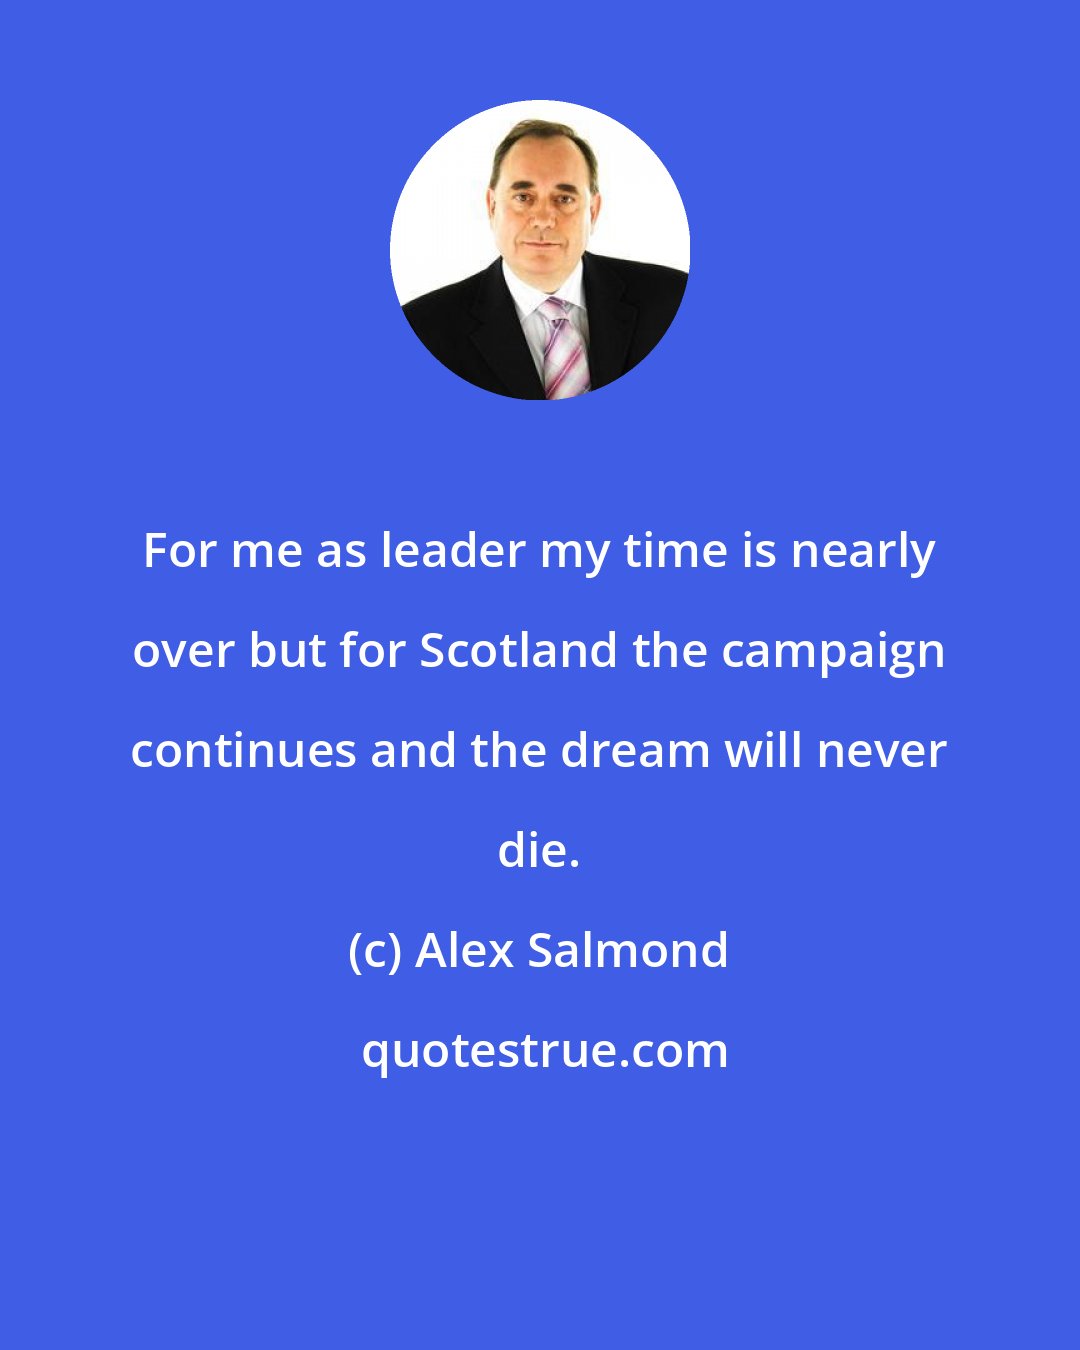 Alex Salmond: For me as leader my time is nearly over but for Scotland the campaign continues and the dream will never die.